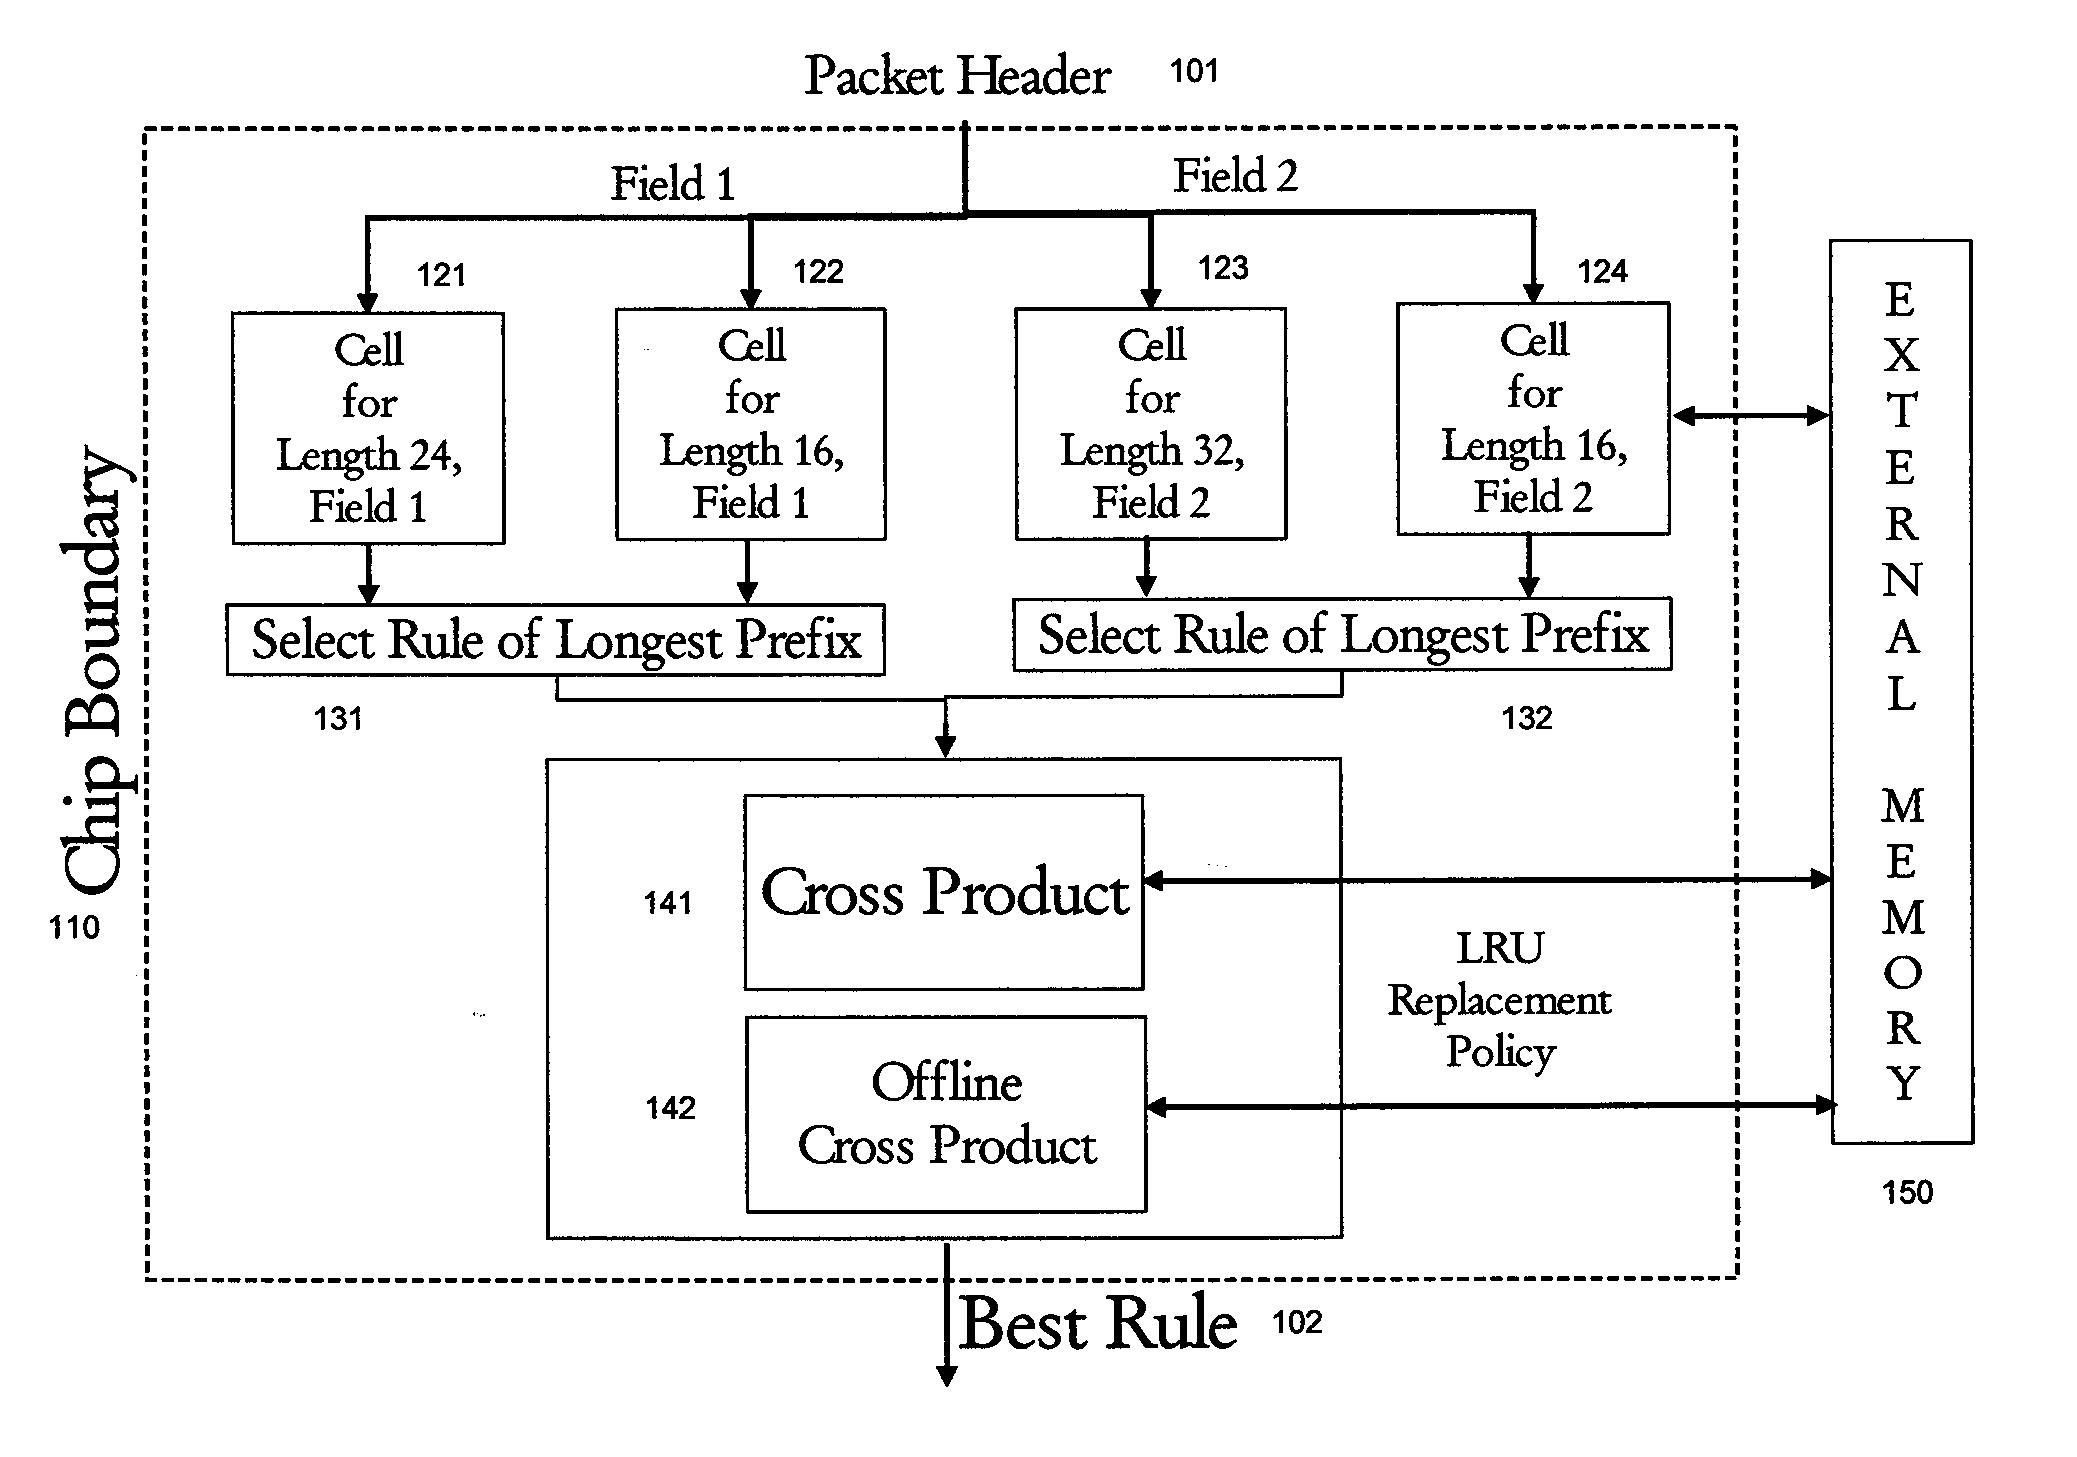 Information Retrieval Architecture for Packet Classification